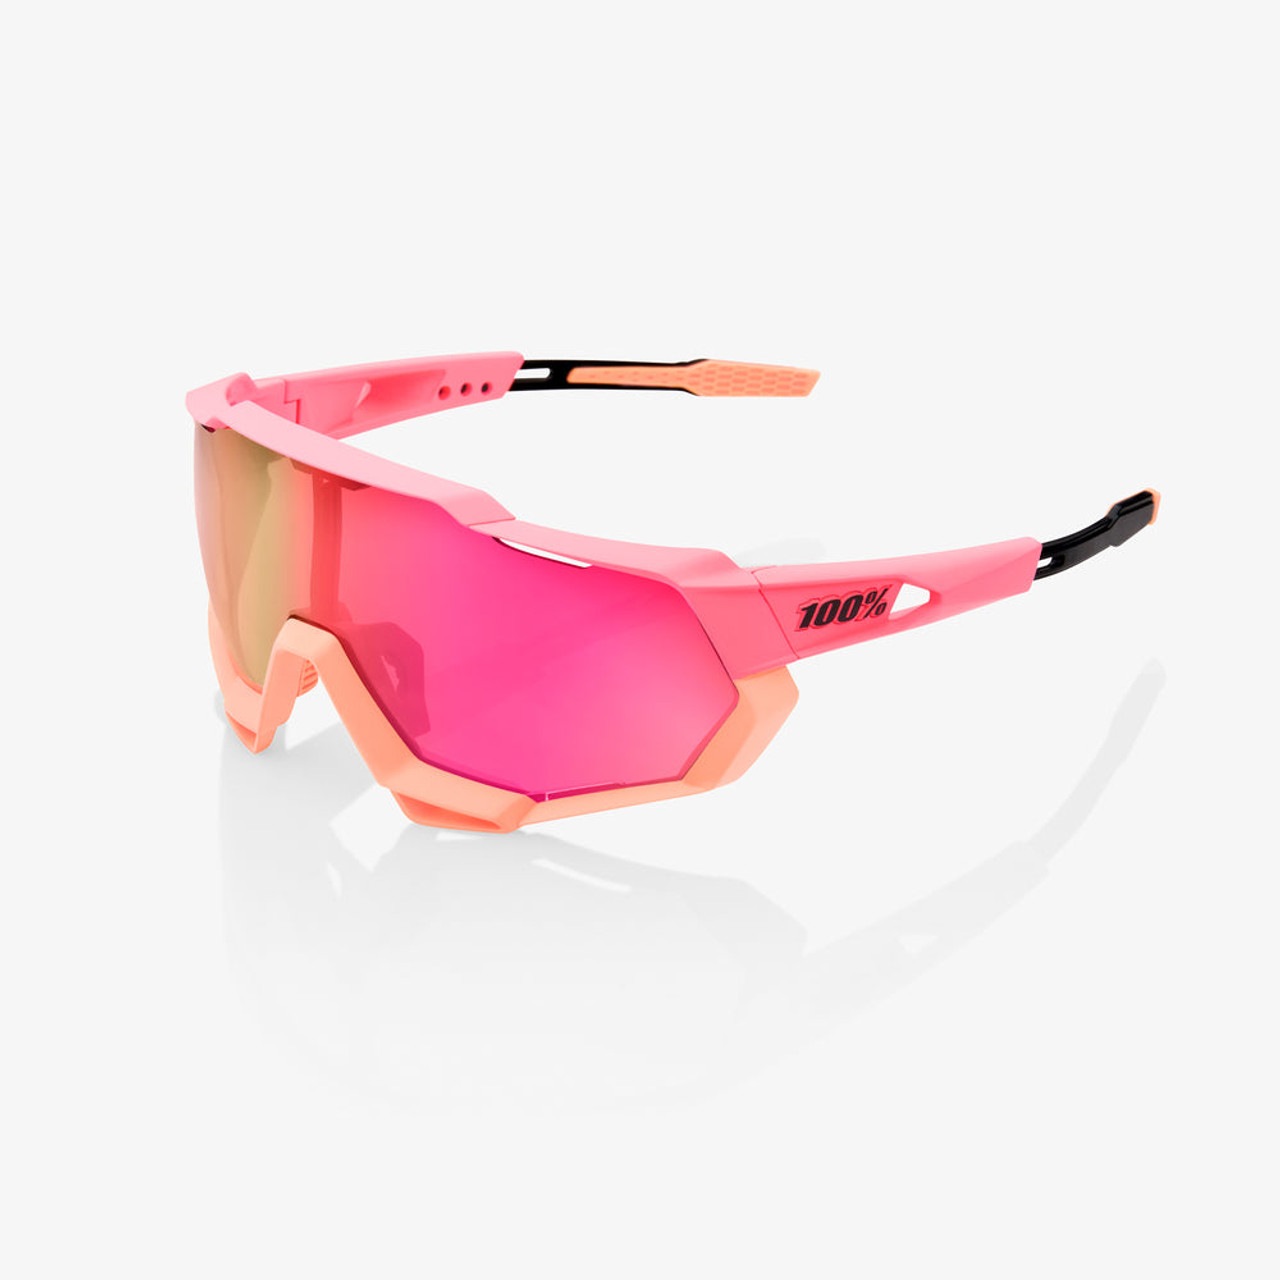 Oakley OO9228 Speed Jacket black frame with clear lenses. Lenses provide  100% UV protection.